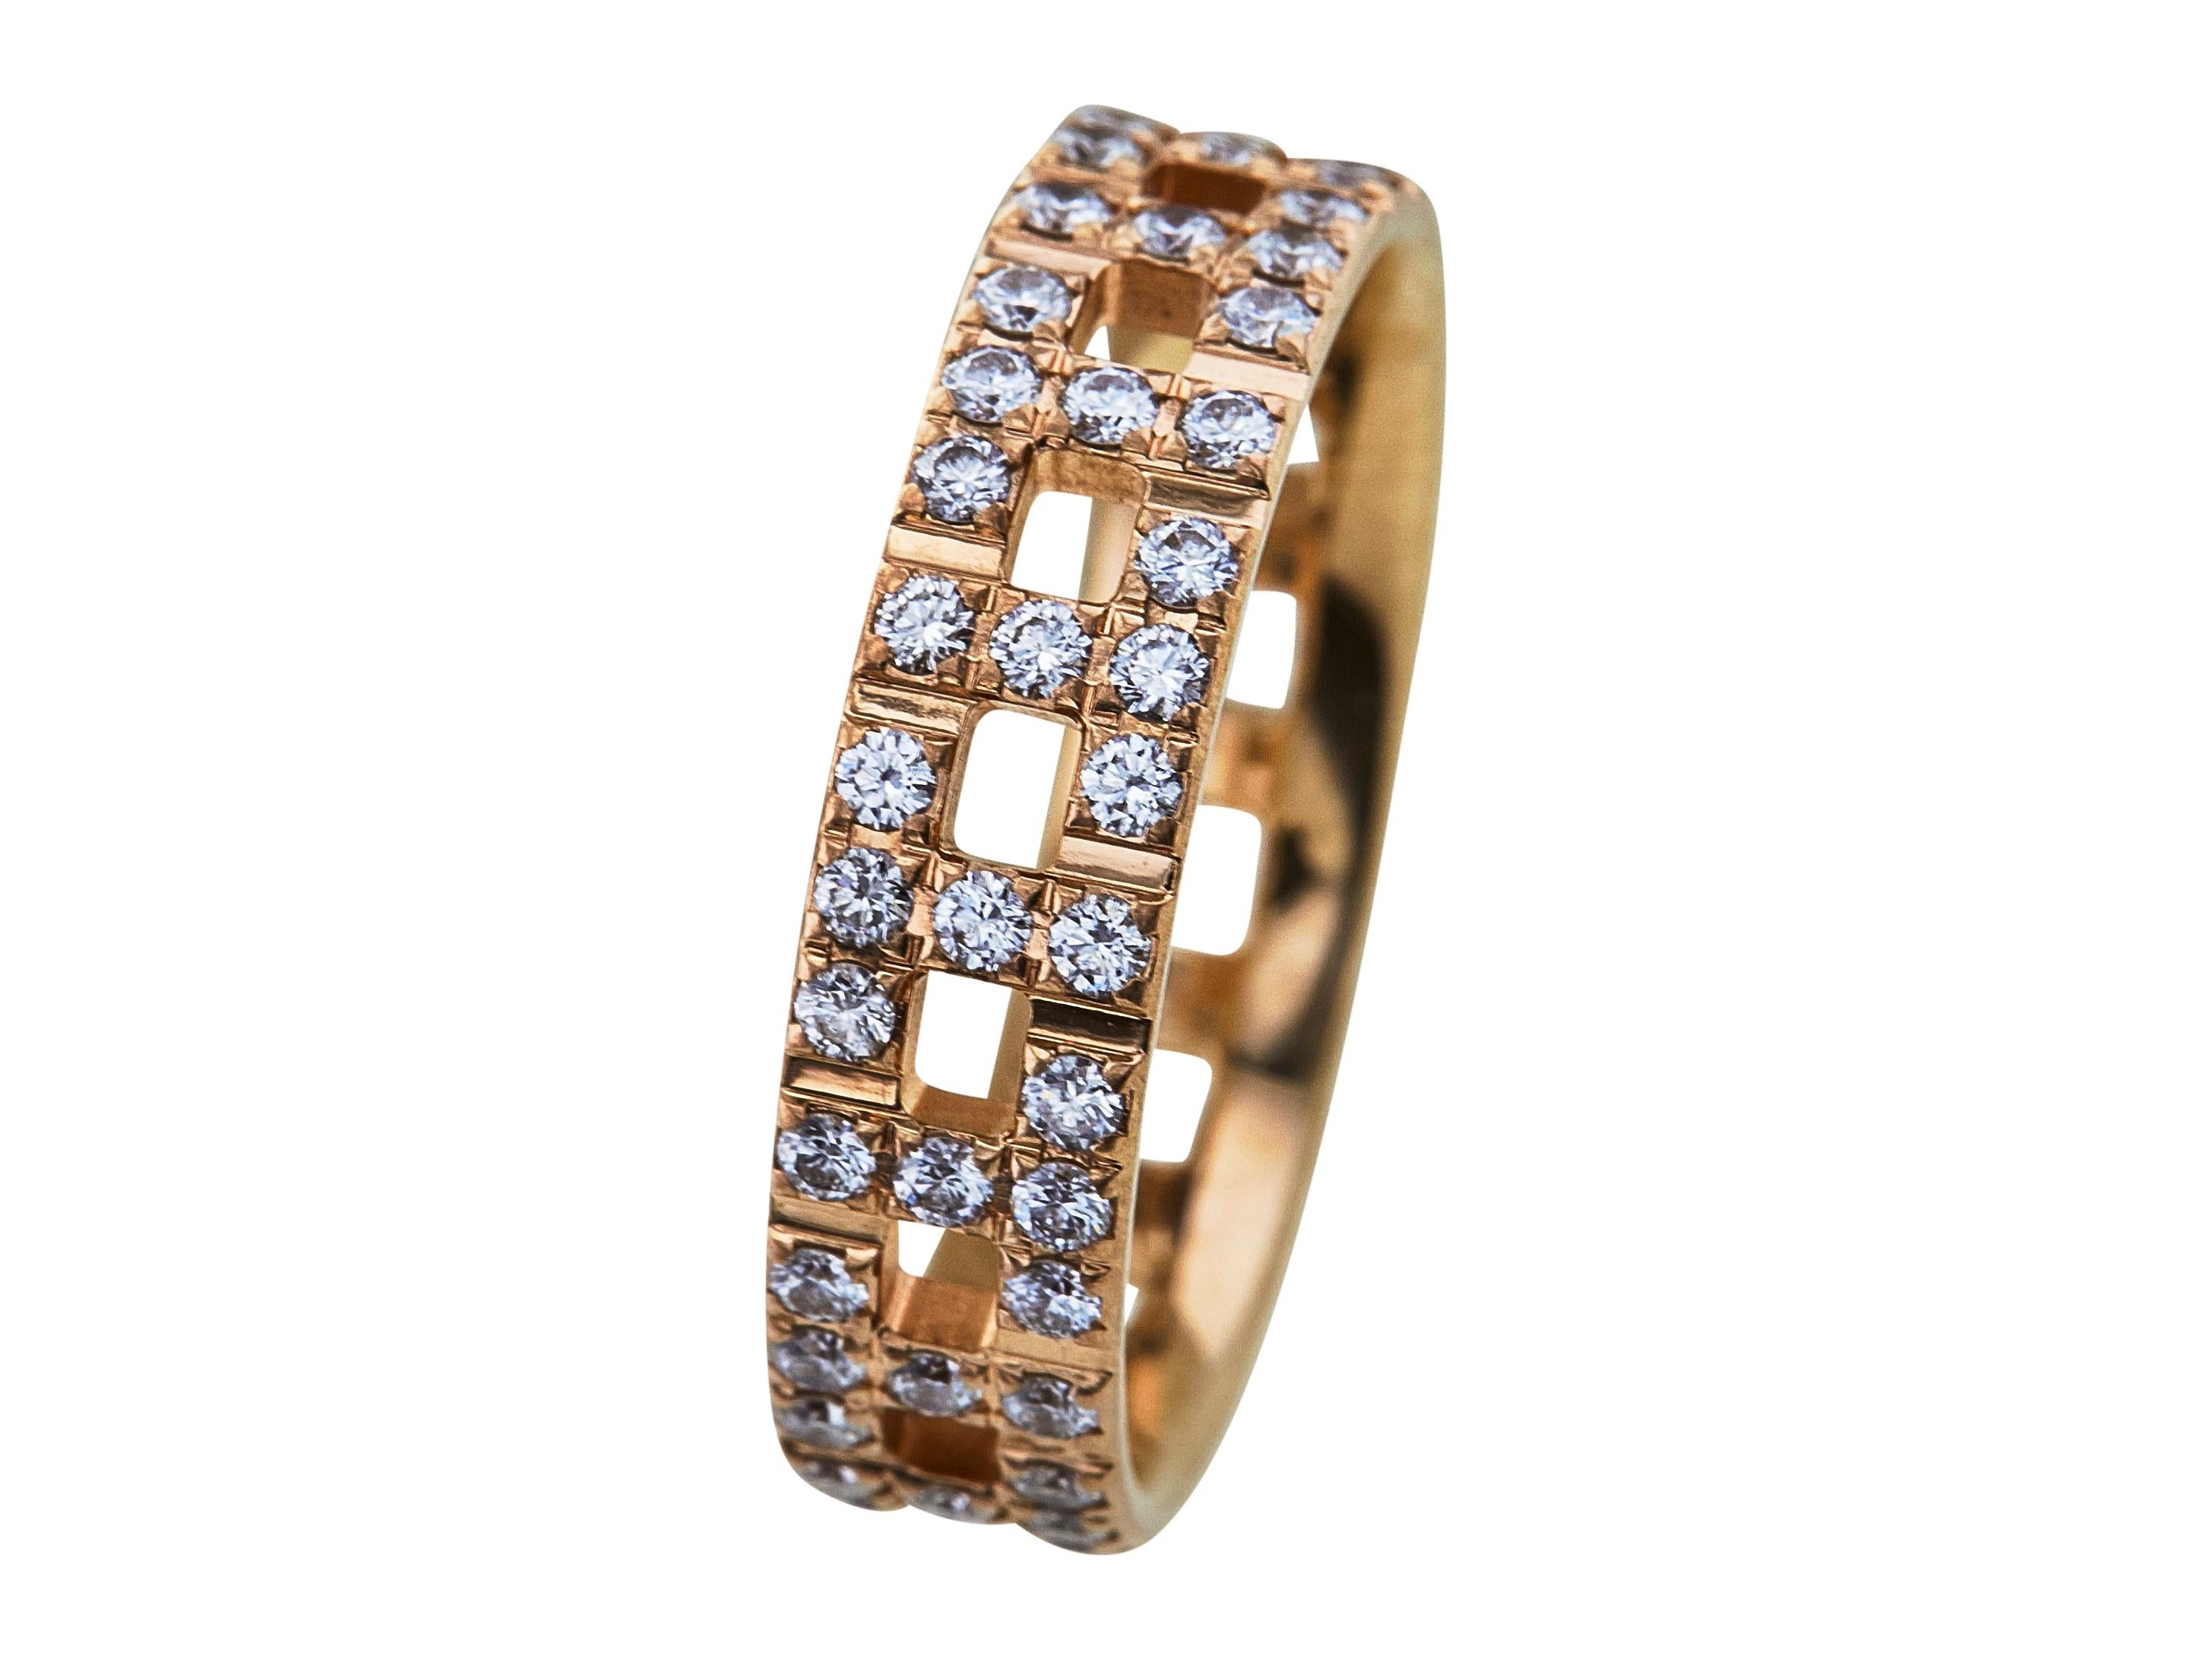 Iconic Tiffany & Co. T True Wide band designed as alternating T links crafted in 18 karat yellow gold and pavé-set with round brilliant cut diamonds weighing an estimated 0.99 carat total weight. Signed Tiffany & Co. 750 Italy. Ring size 8 ½. The